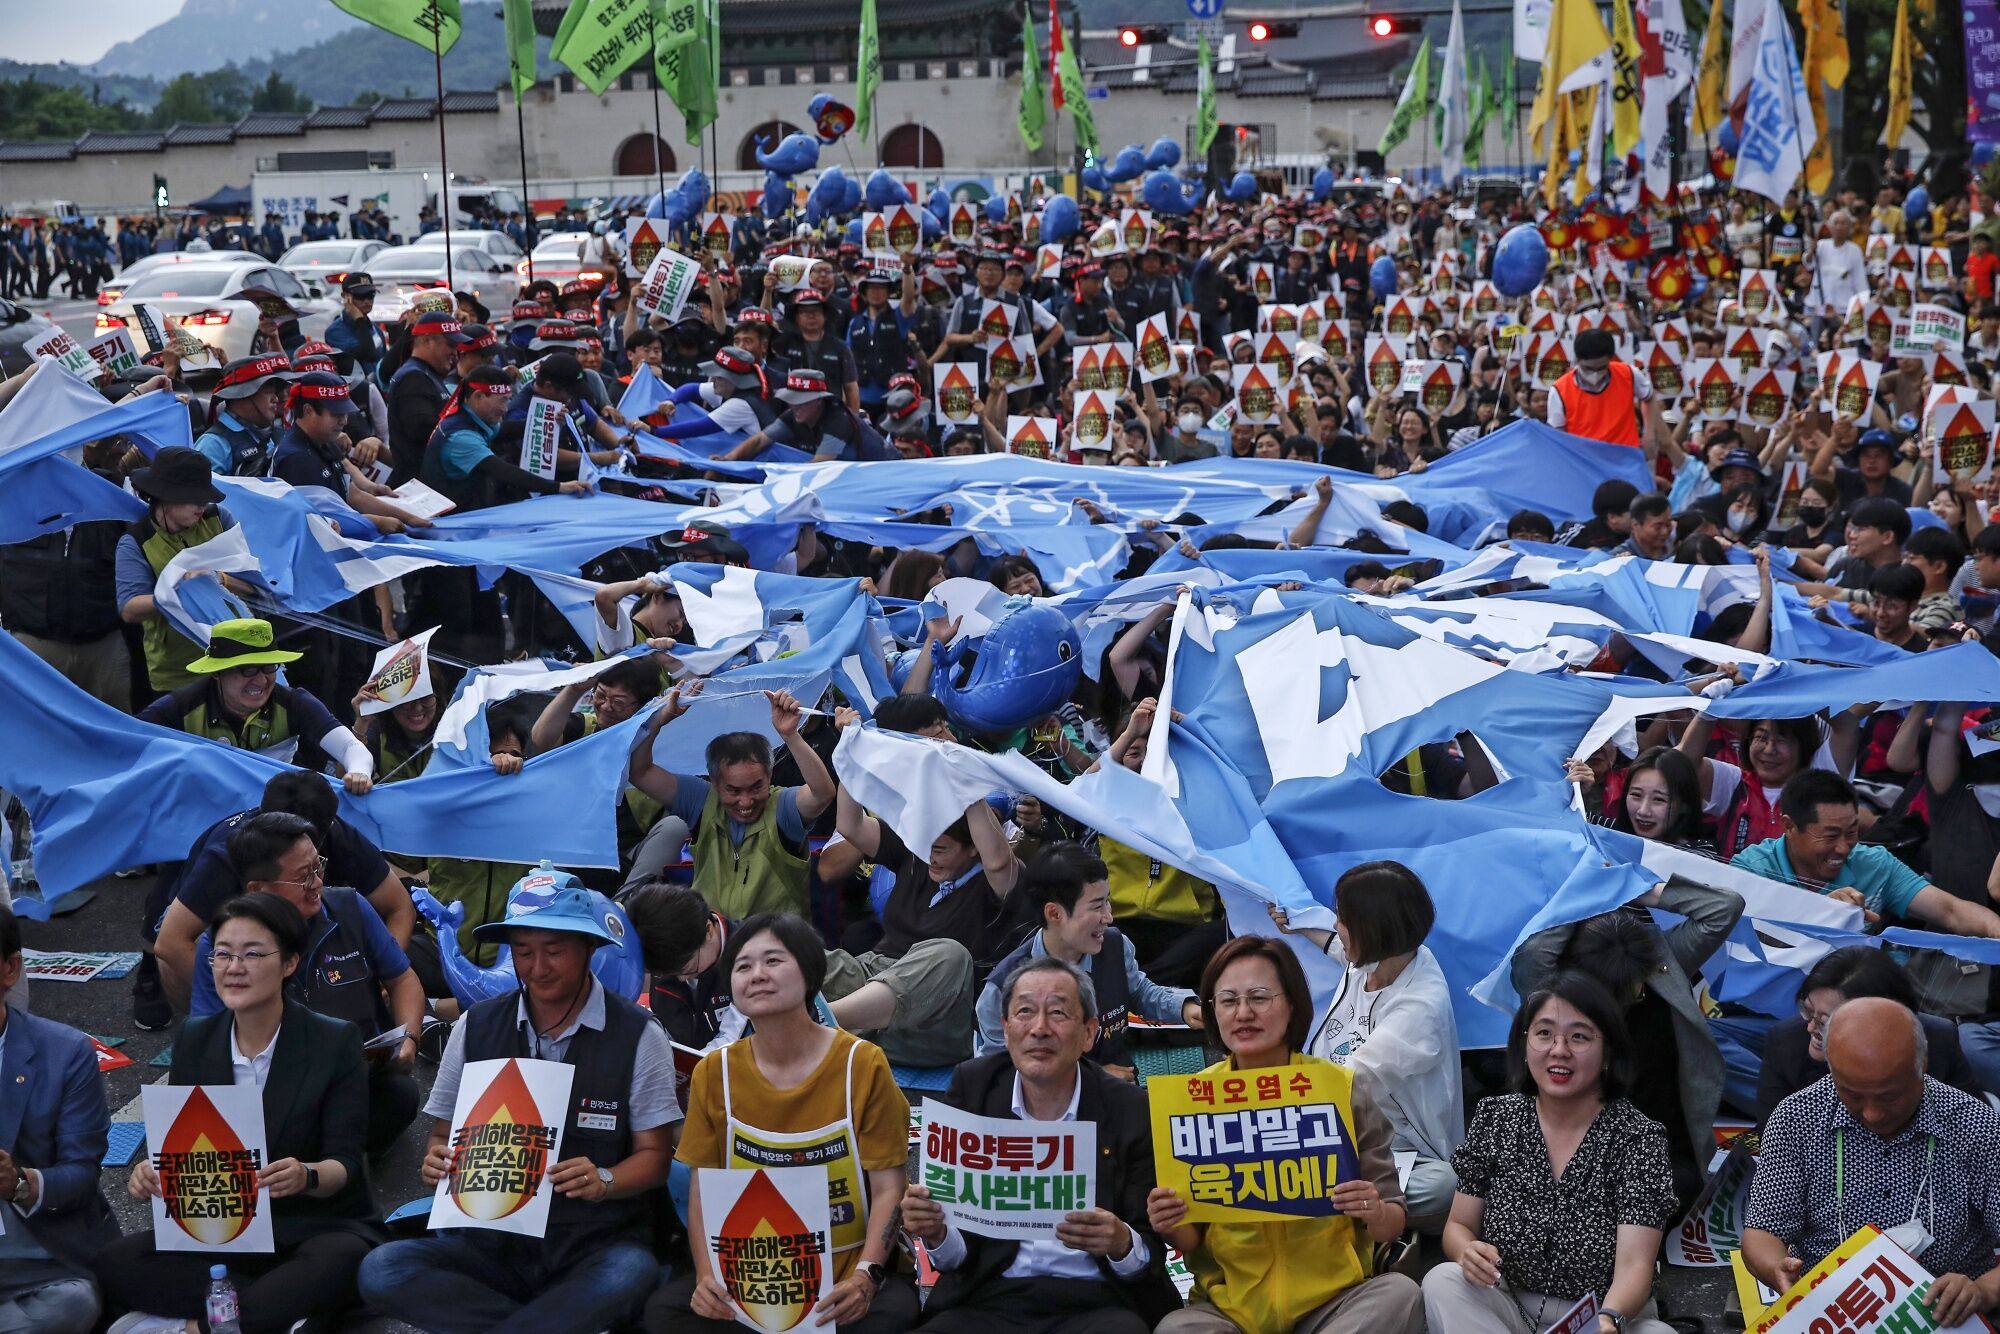 South Koreans protest against Japan’s plan to release treated waste water from the Fukushima nuclear plant site into the sea, in Seoul on July 8. Photo: Bloomberg